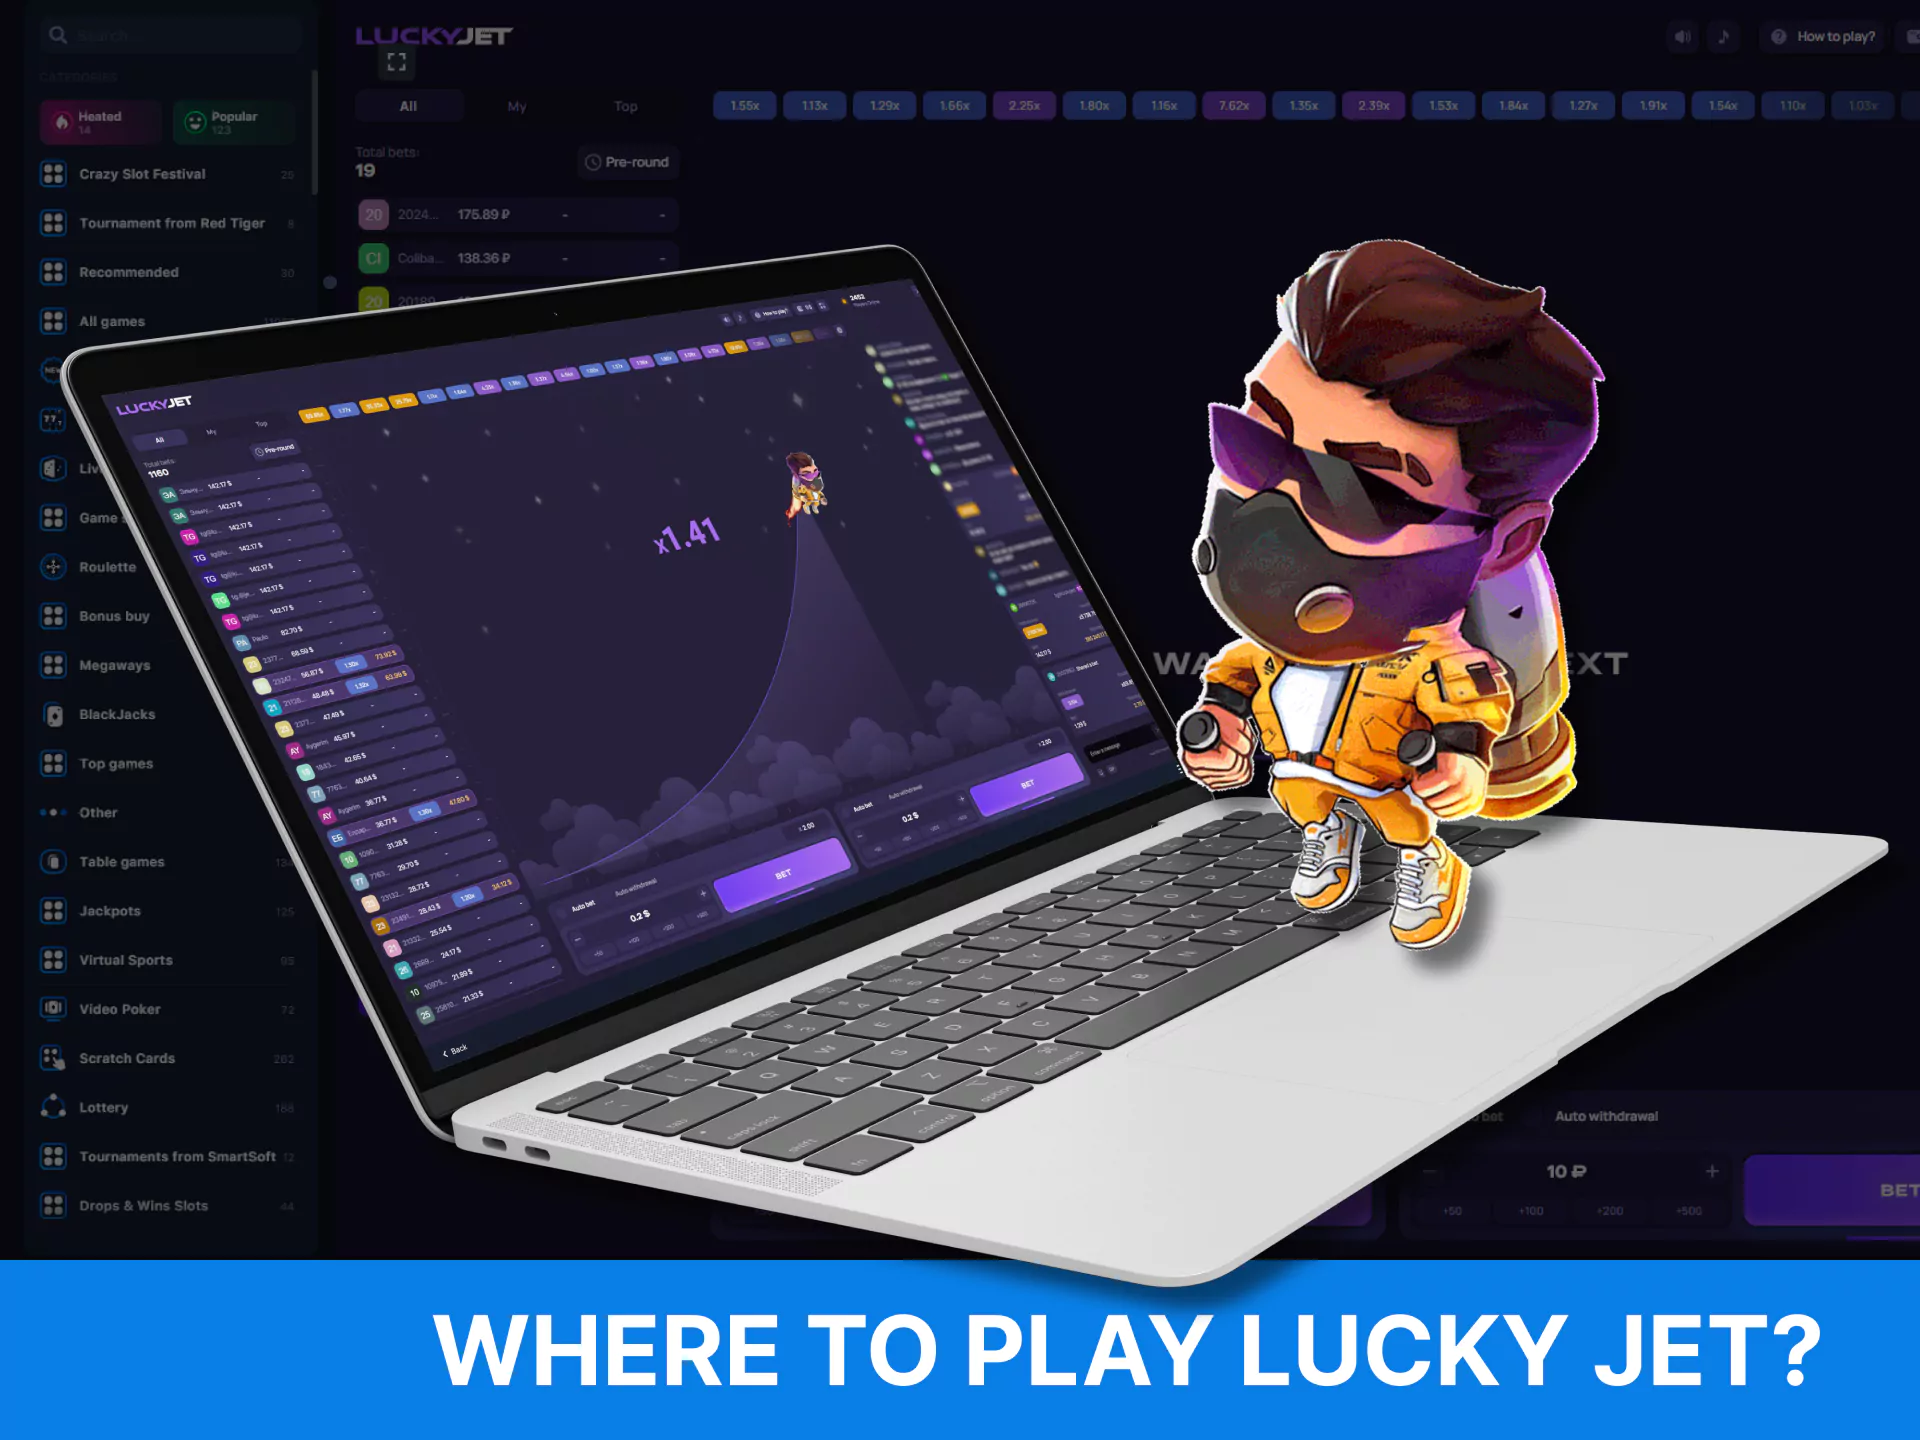 You can play Lucky Jet on the official website or the app 1Win.